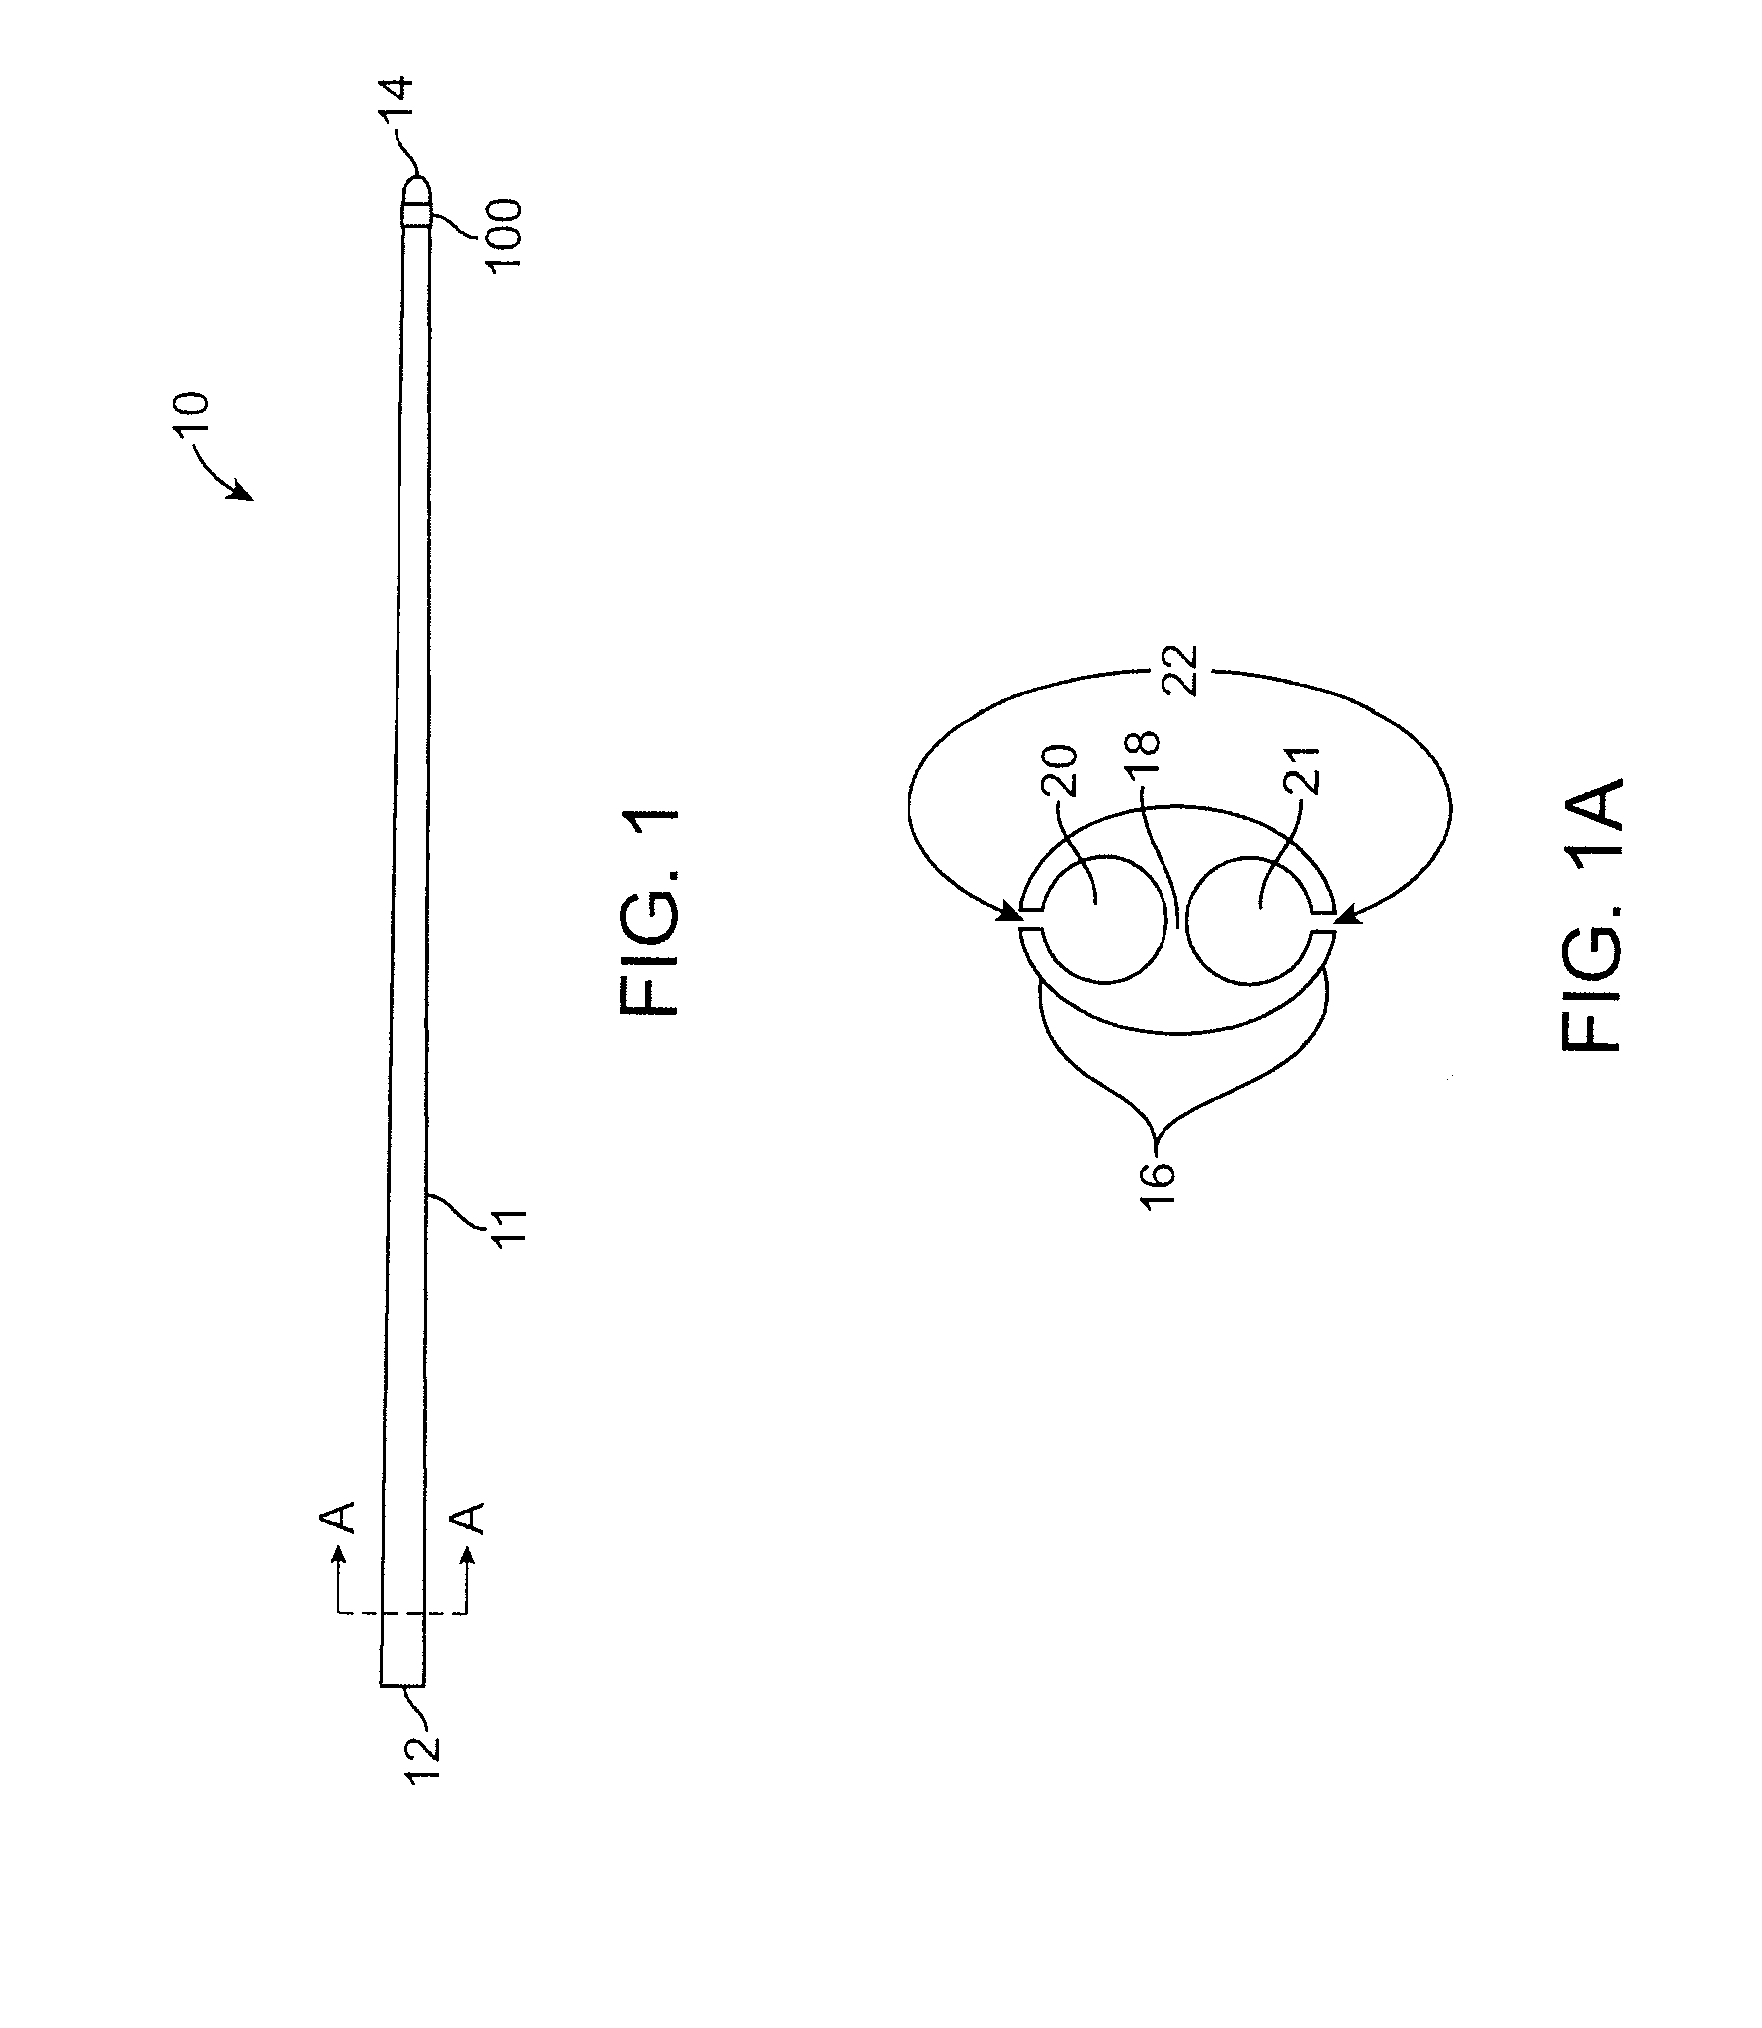 Guidewire placement device